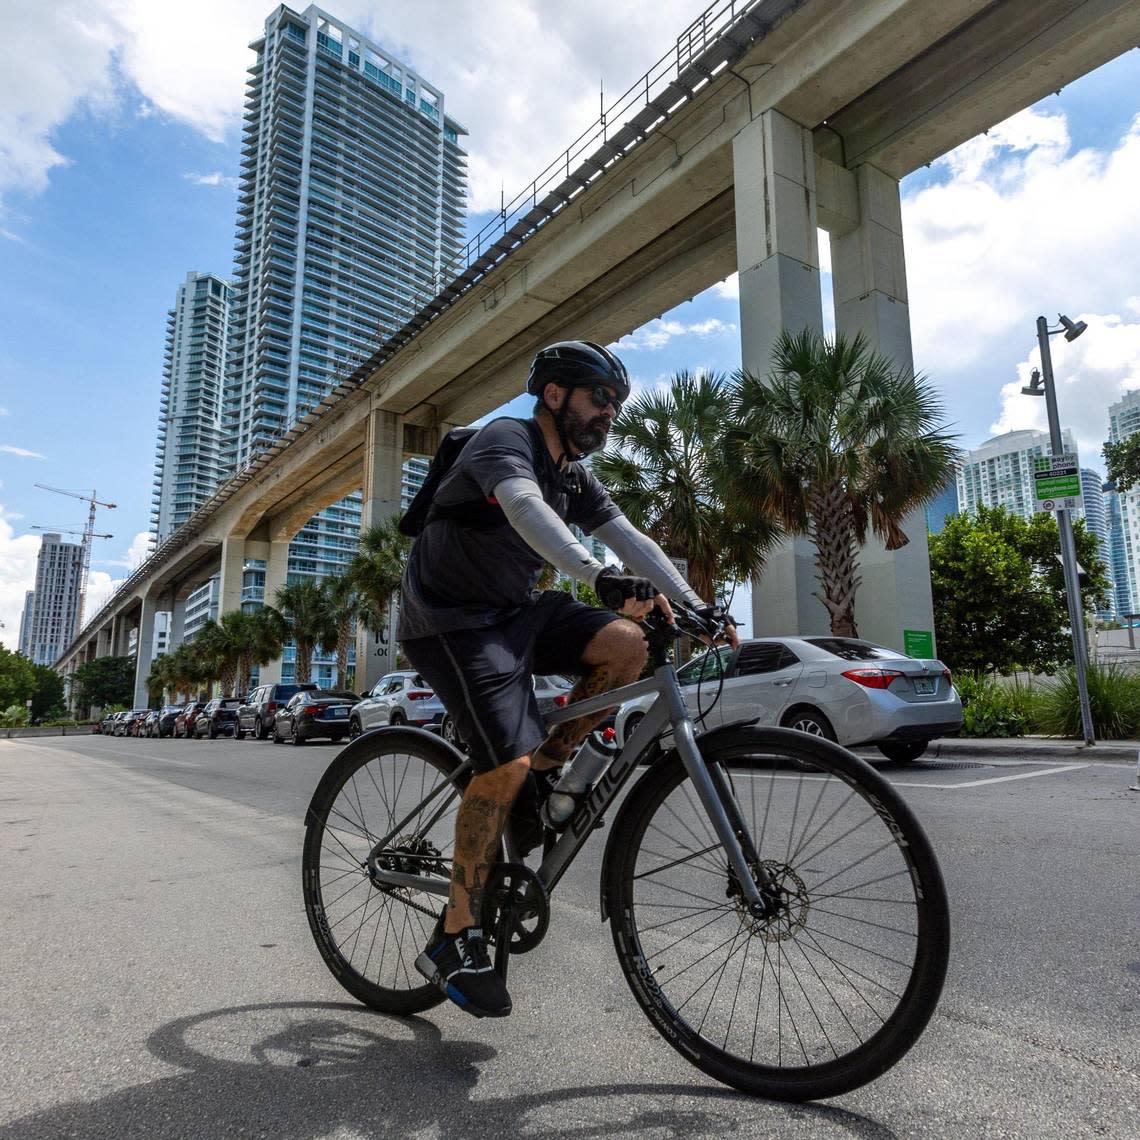 Ahol Sniffs Glue departs on his bike to find more trash to draw on to leave for fans of his artwork to find. D.A. Varela/dvarela@miamiherald.com